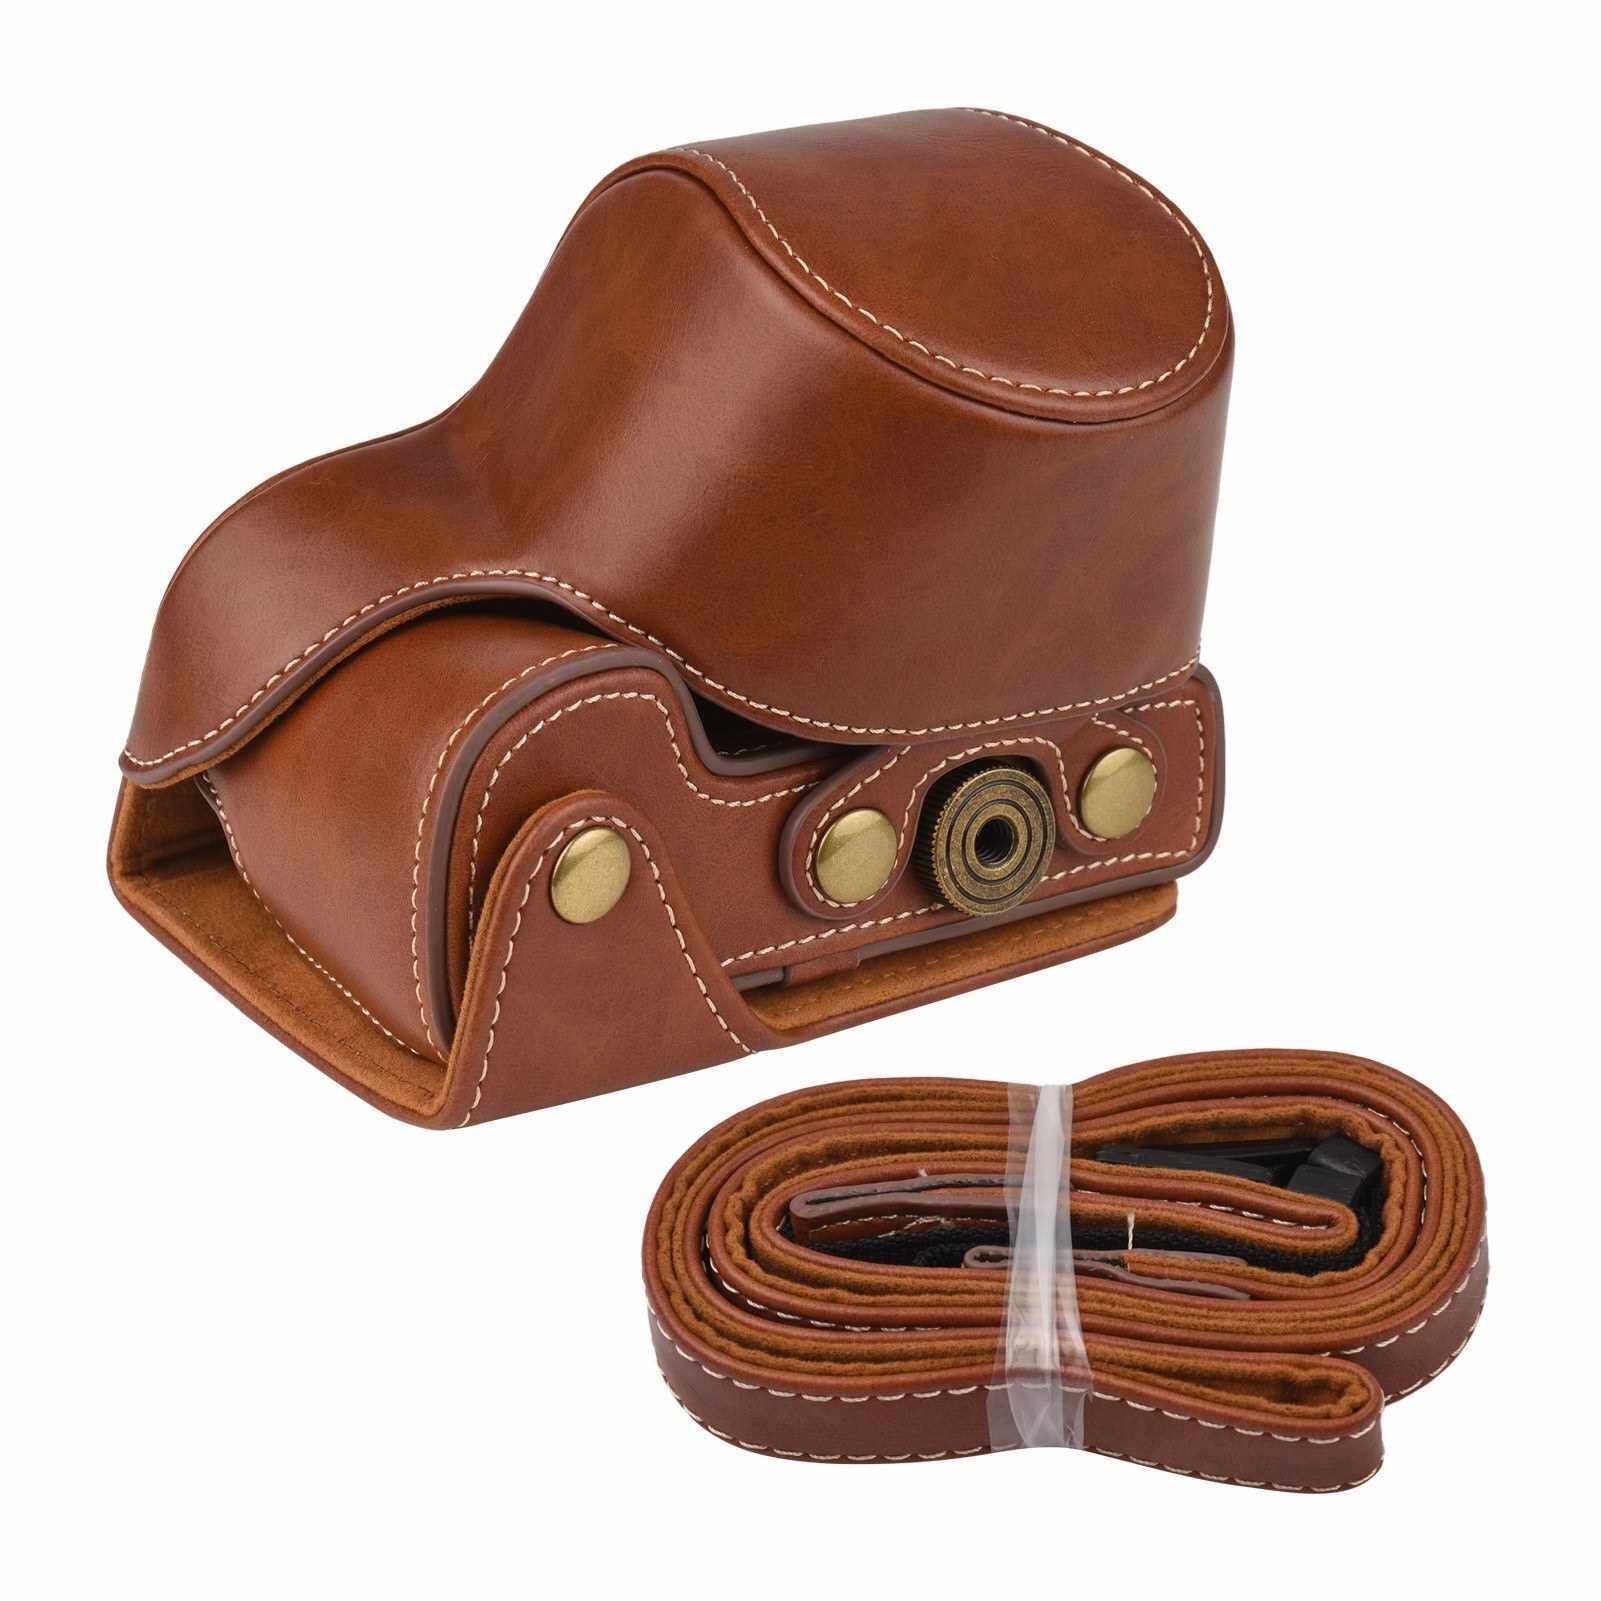 Portable PU Leather Camera Case with Shoulder Strap Replacement for Sony A6000 A6300 A6400 (Brown)